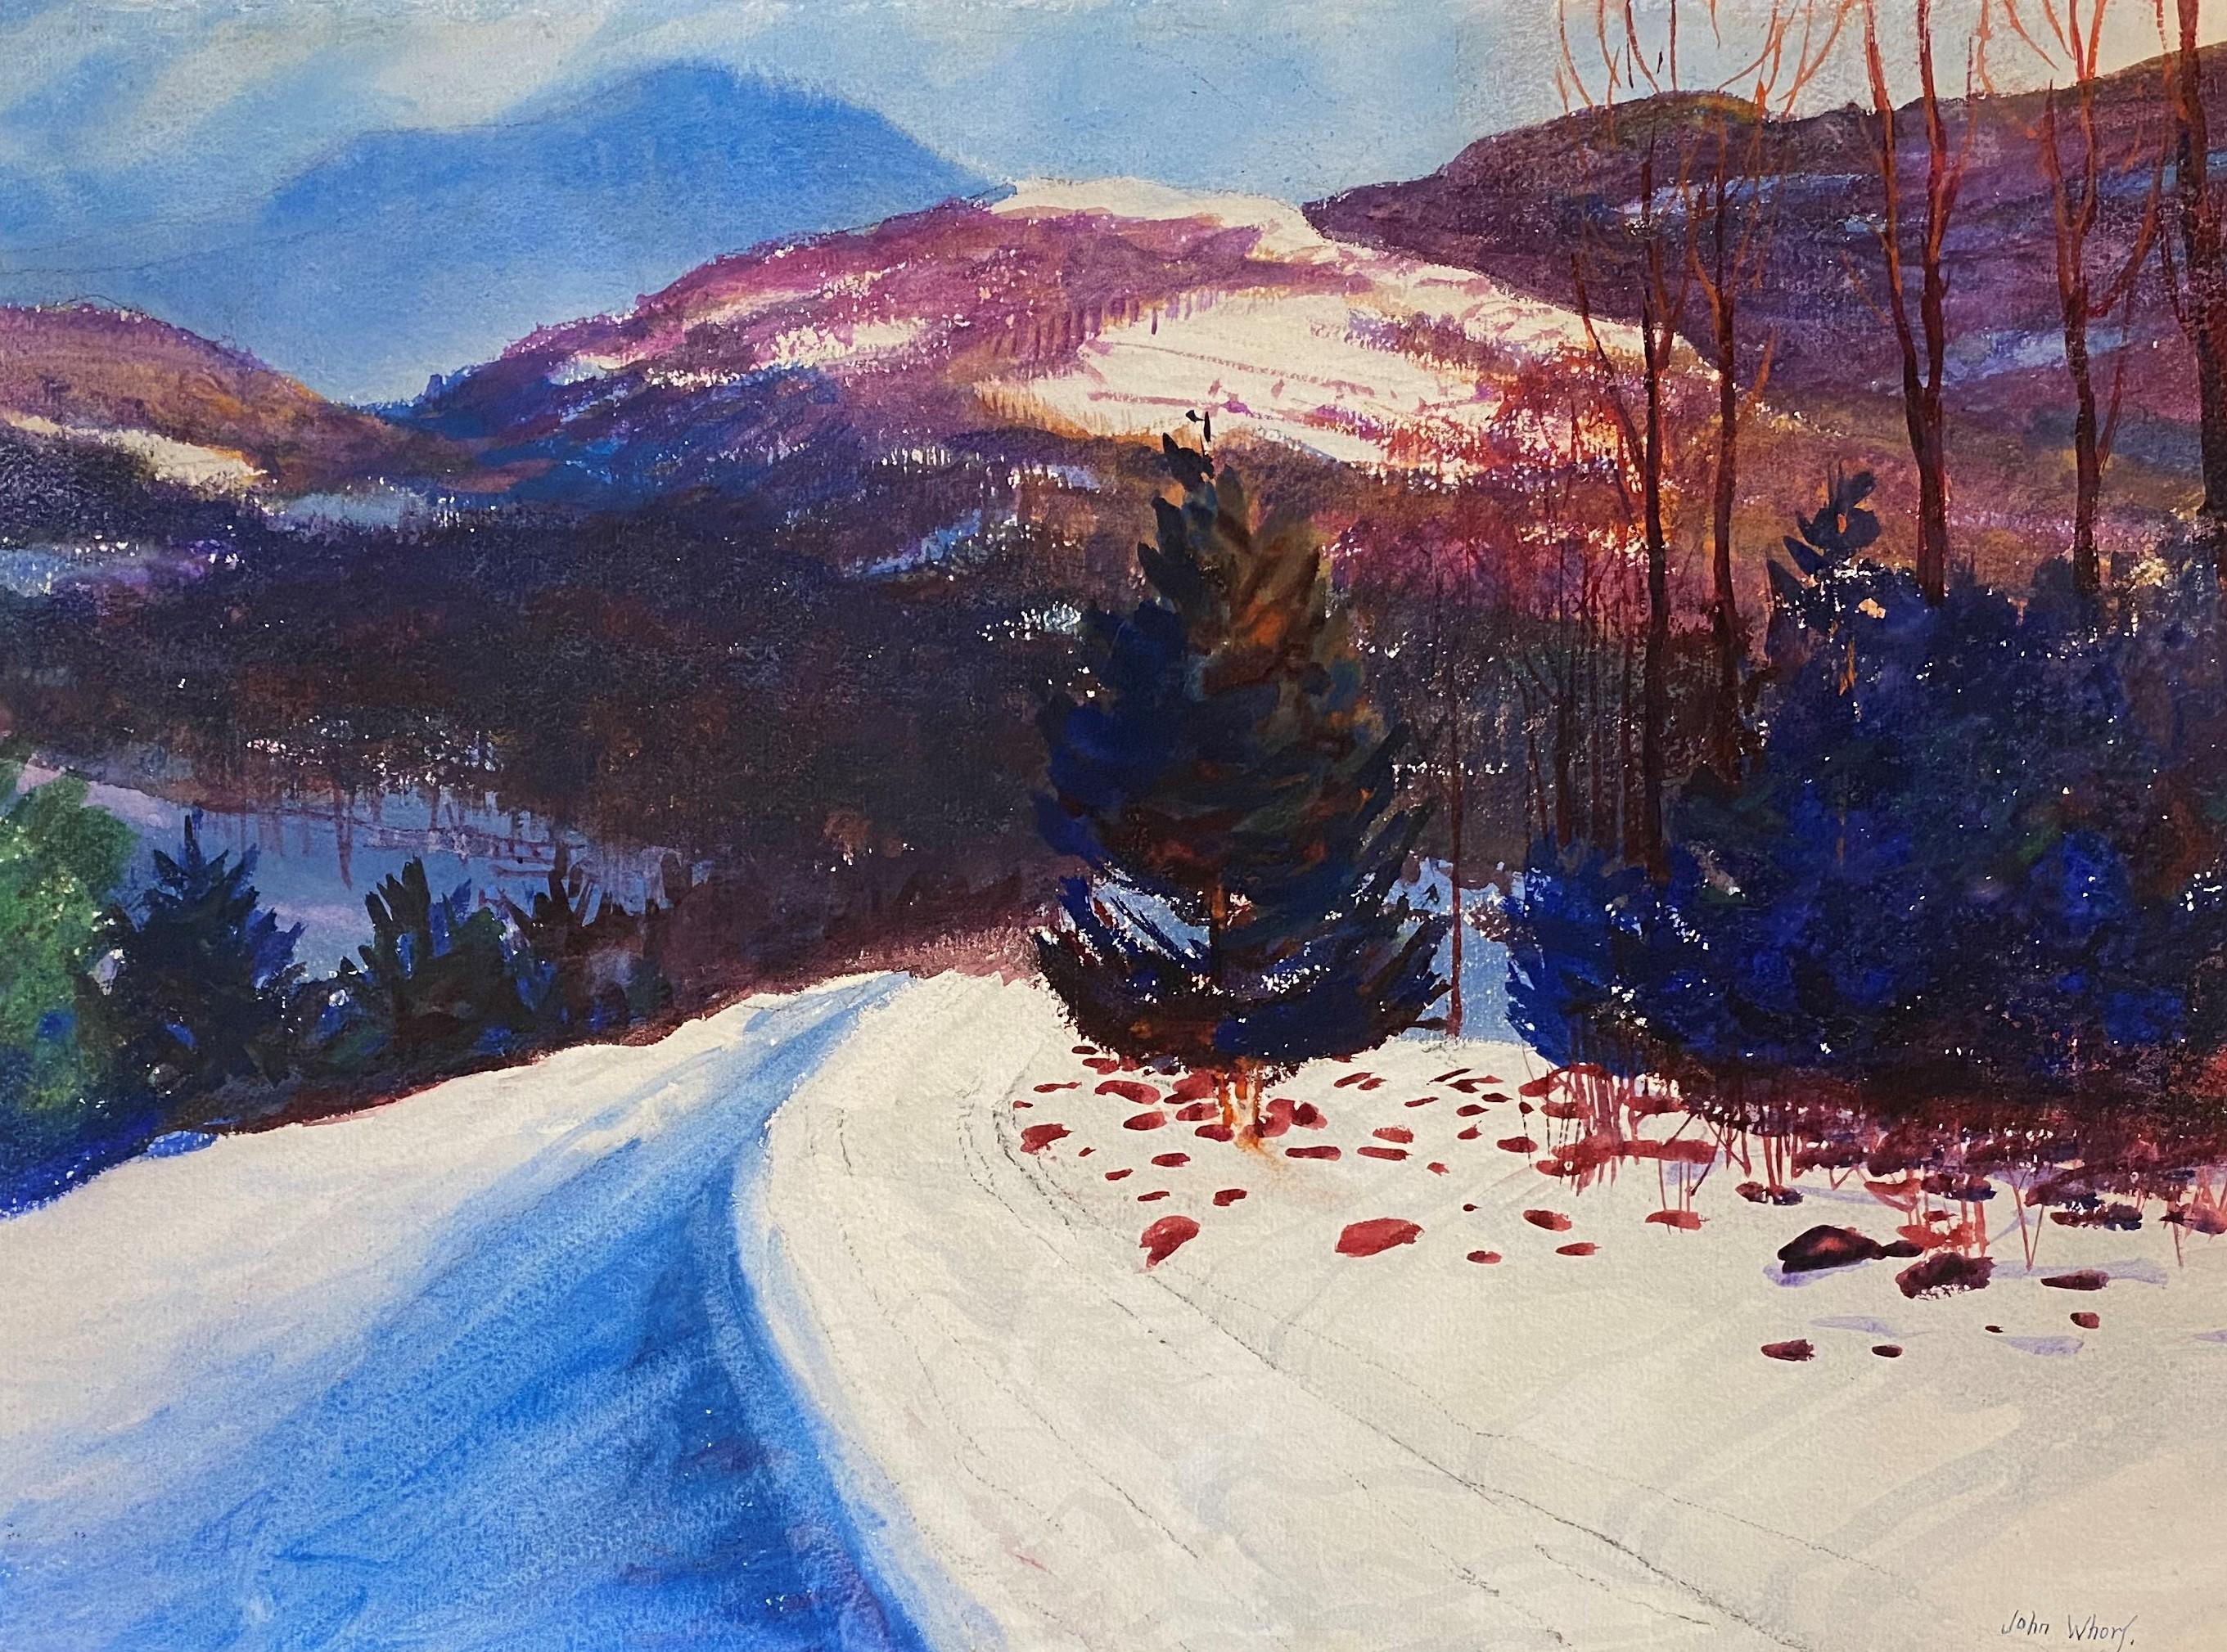 Equinox Mountain, VT - Painting by John Whorf